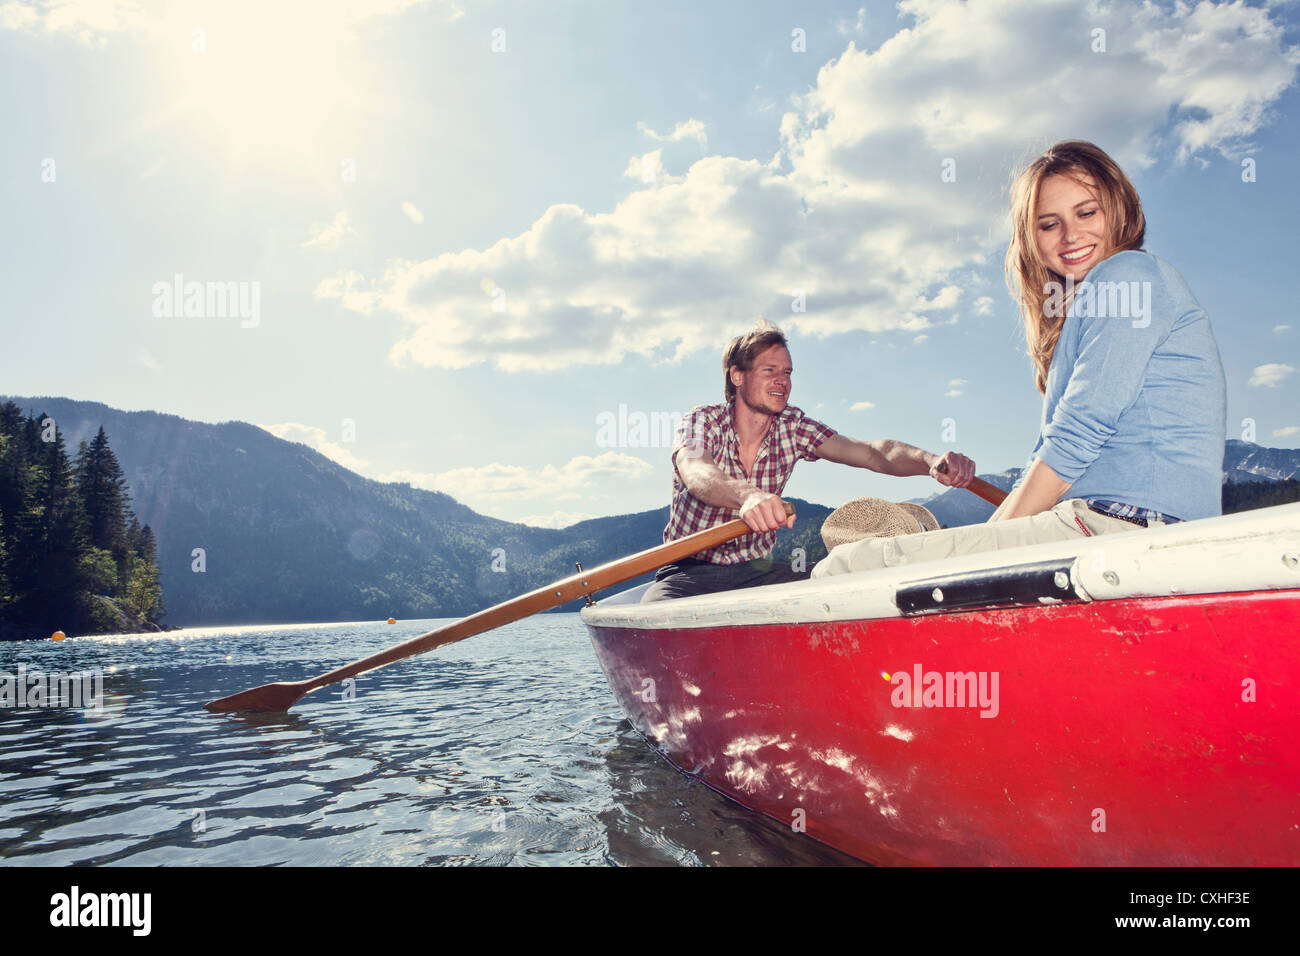 Germany, Bavaria, Couple in rowing boat, smiling Stock Photo